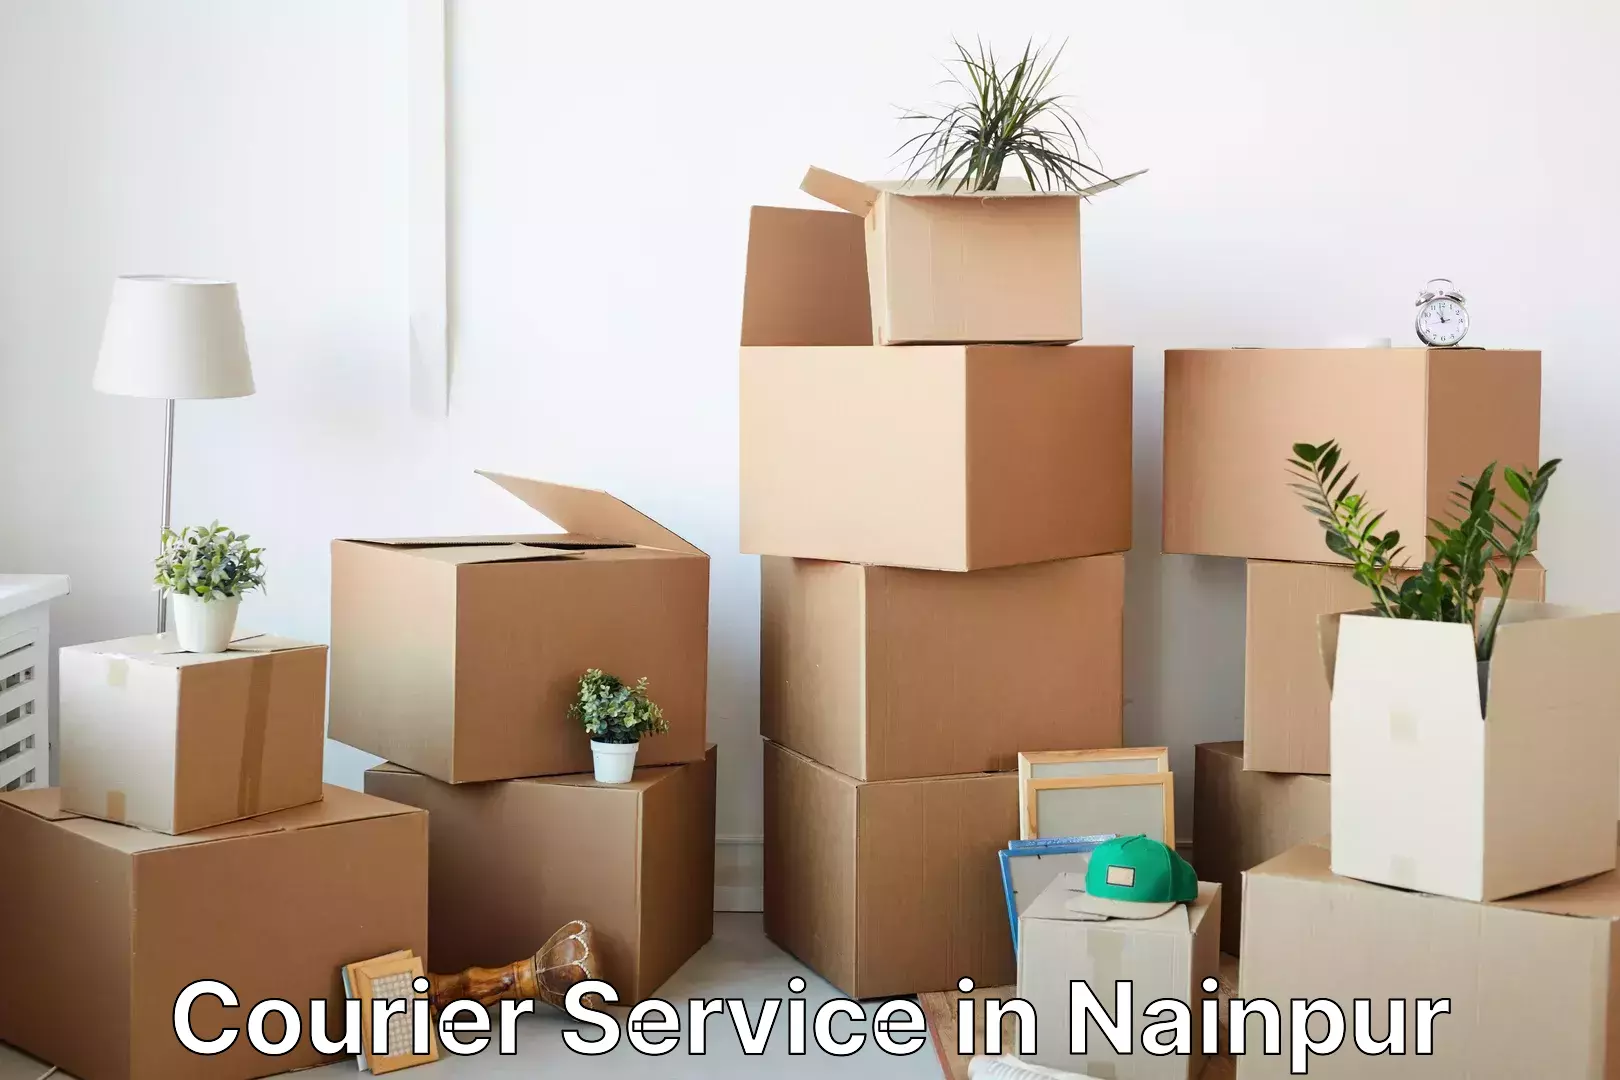 Efficient parcel service in Nainpur